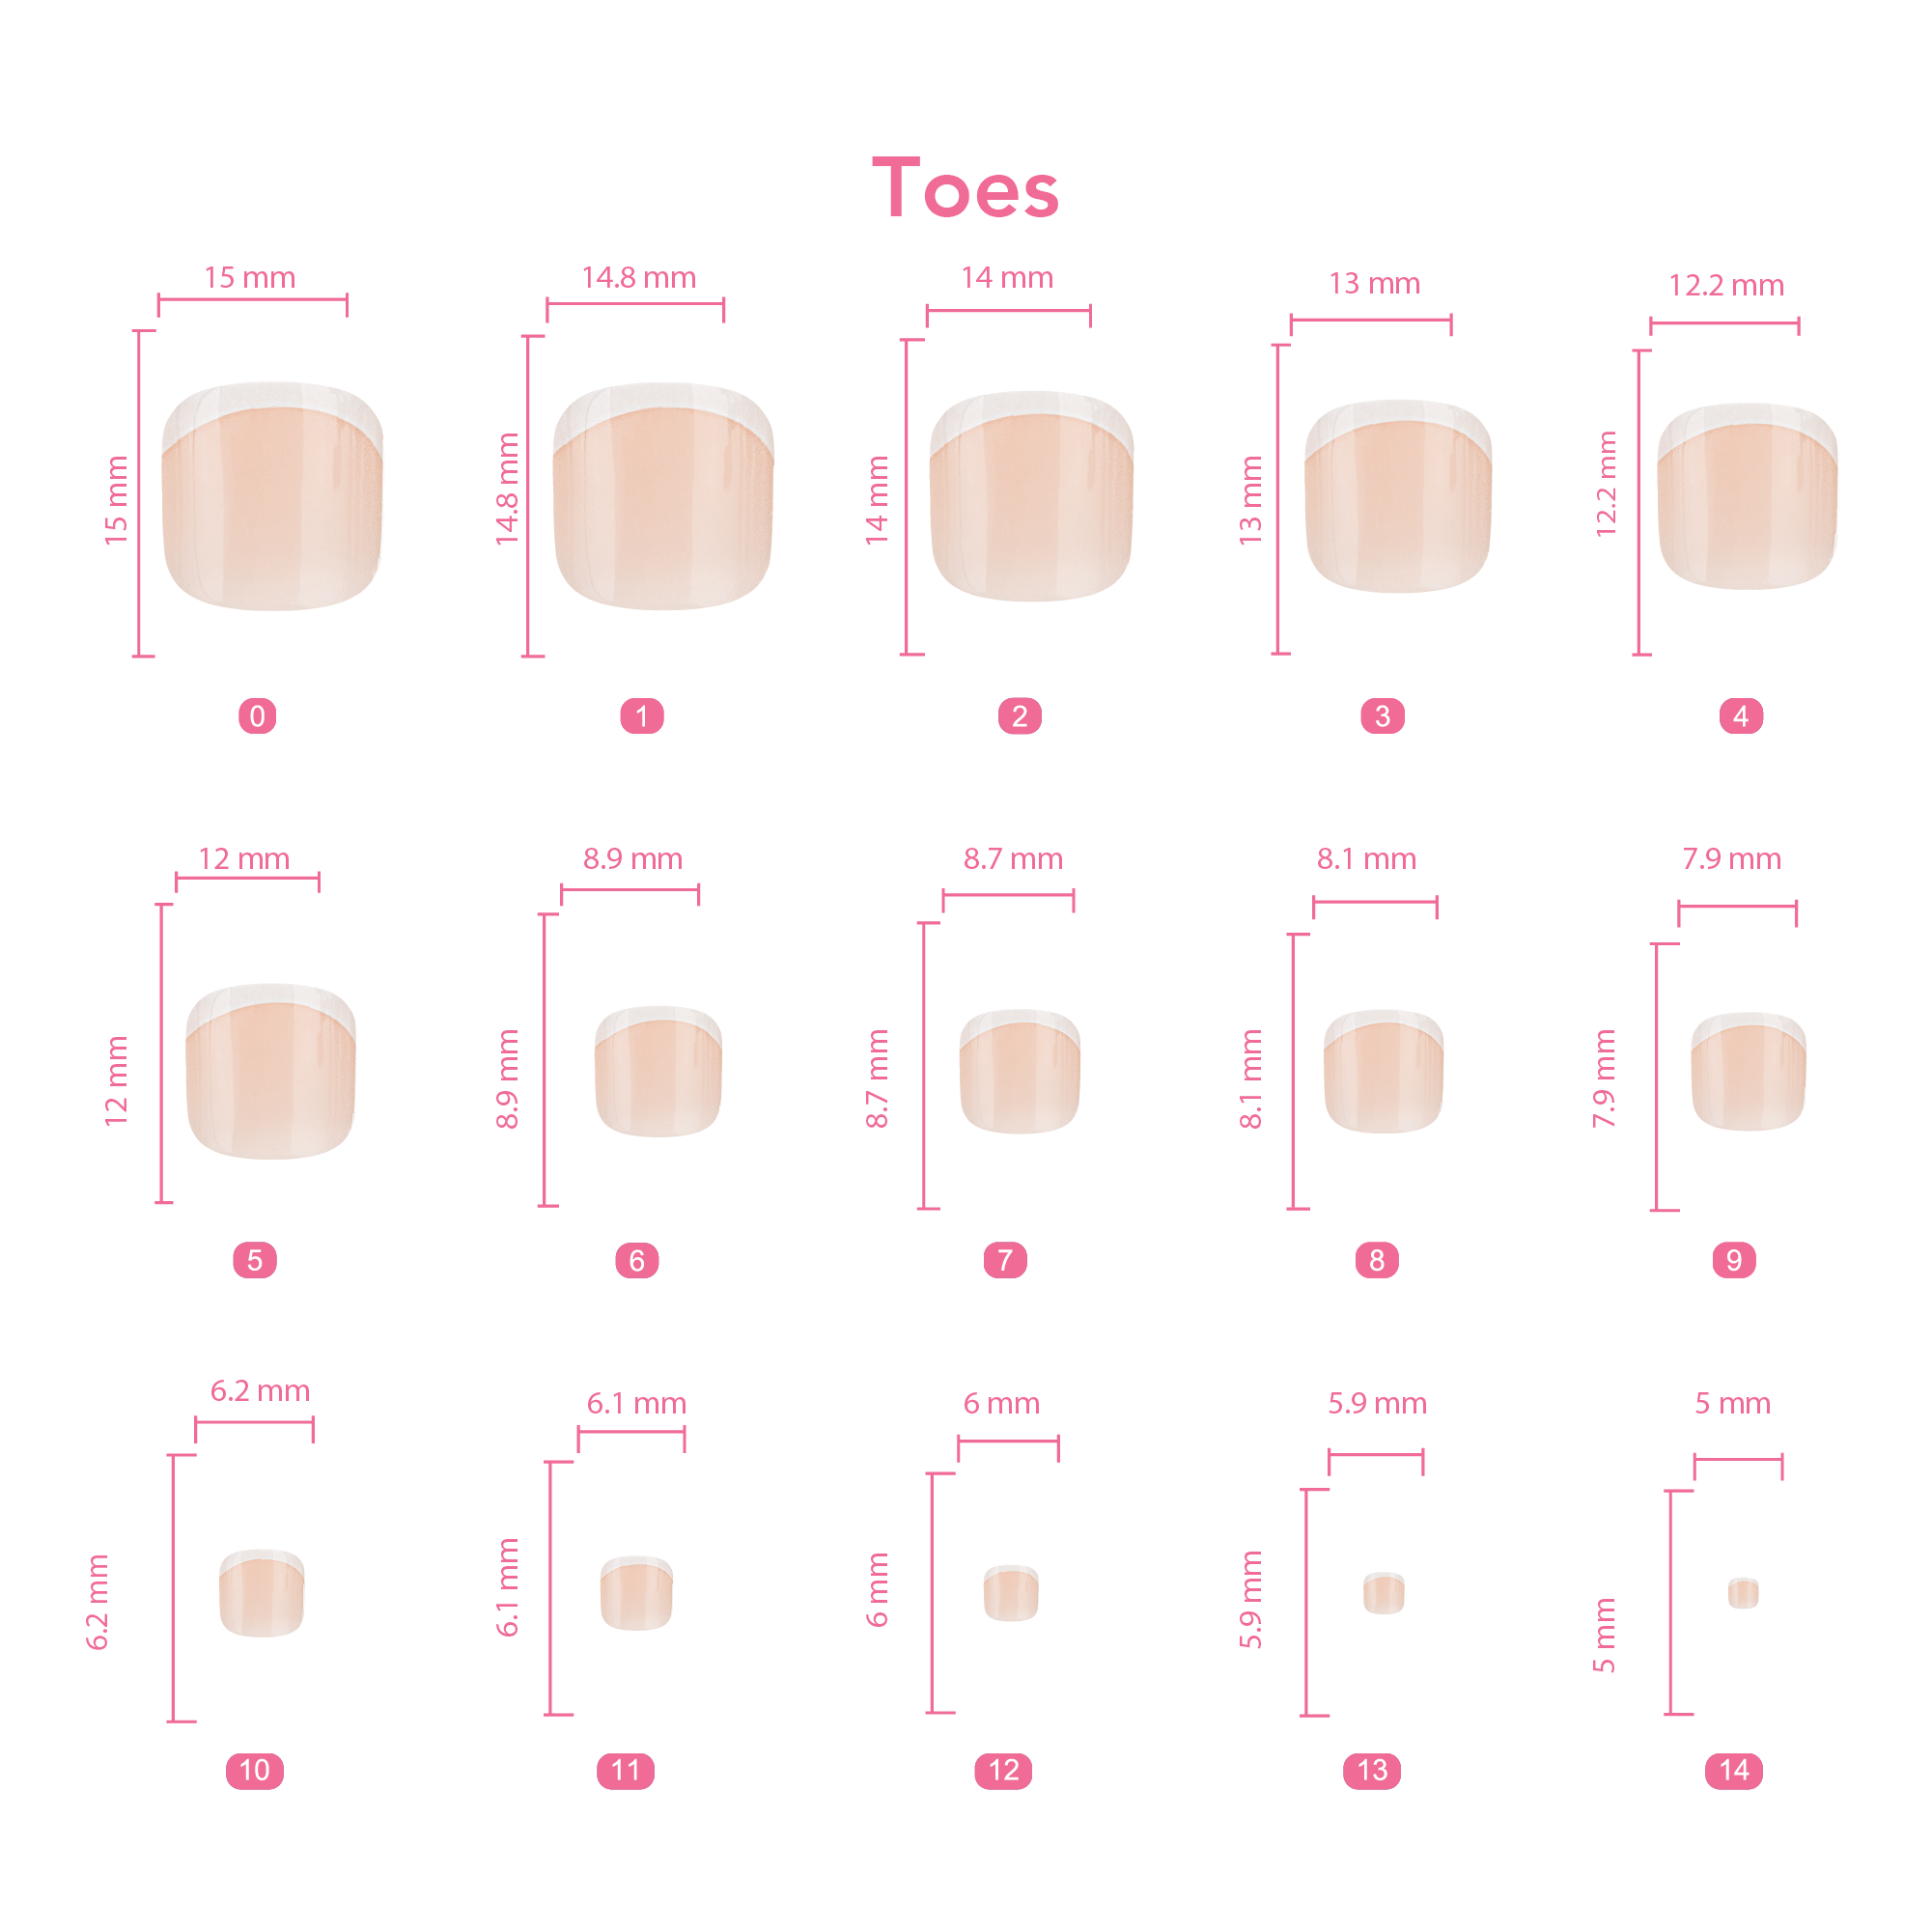 KS Press On Sizing Guide - Toes